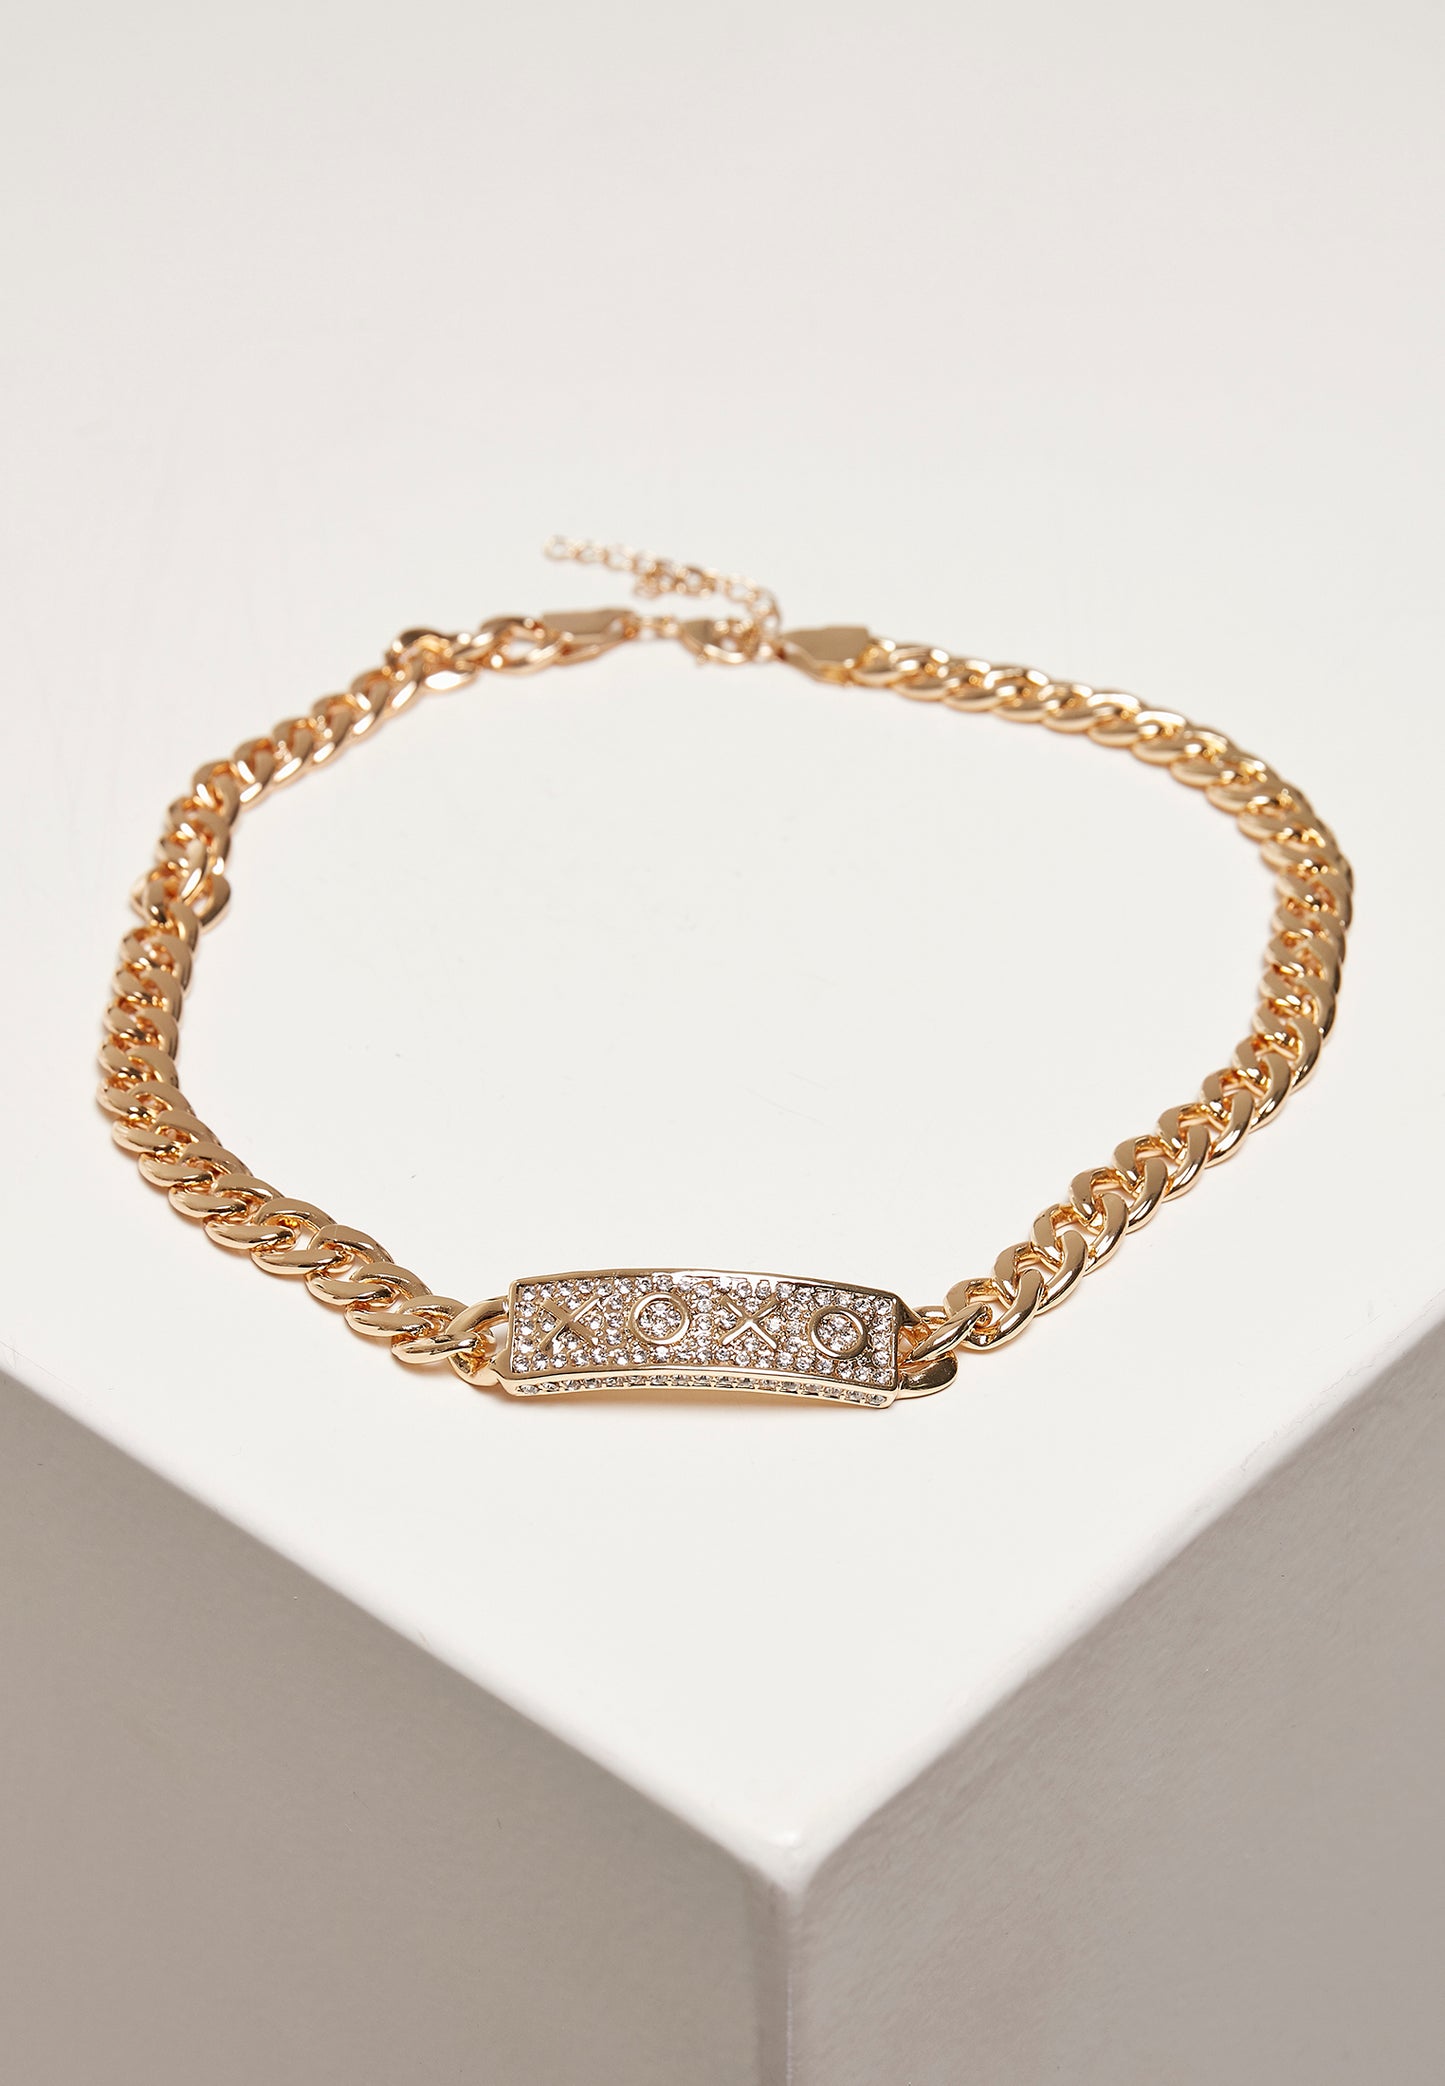 Urban Classics XOXO Halskette Iced Out Kette